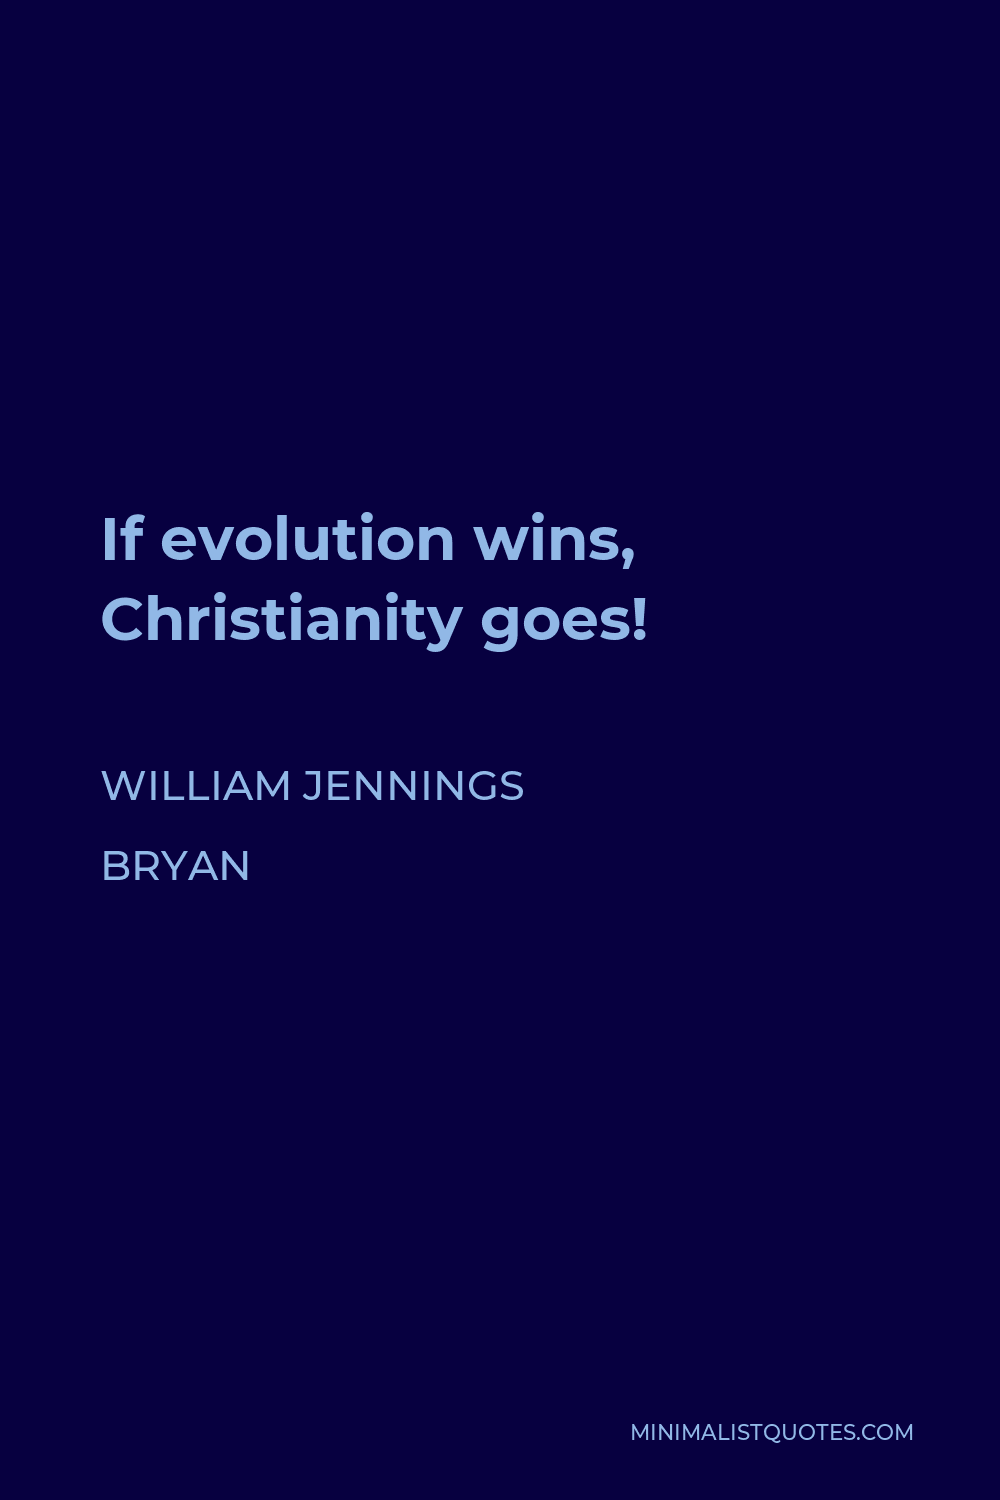 William Jennings Bryan Quote - If evolution wins, Christianity goes!